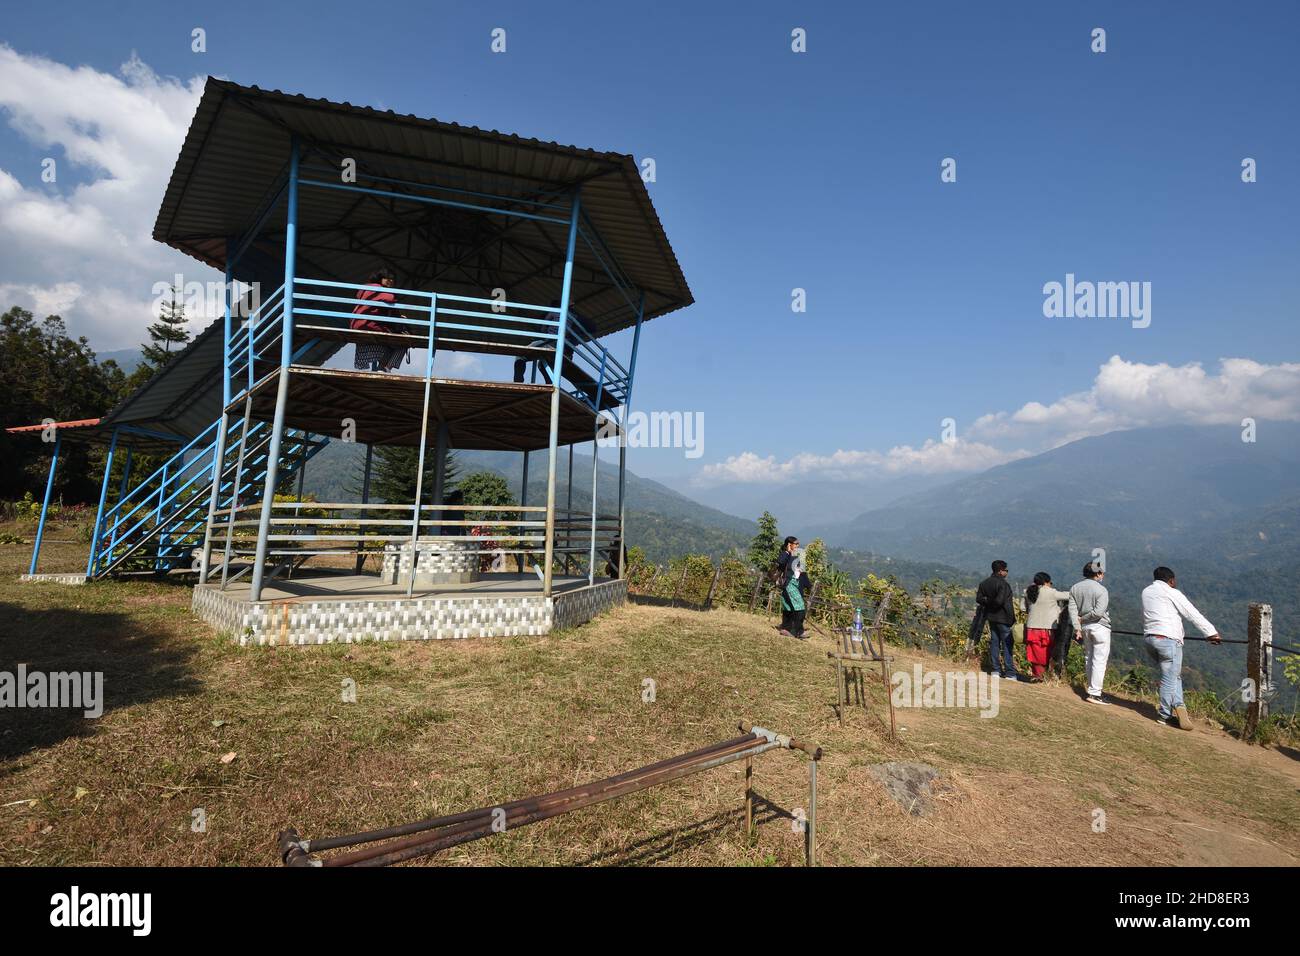 Observation structure. Dalgaon viewpoint (altitude 2500 ft). Kalimpong, West Bengal, India. Stock Photo